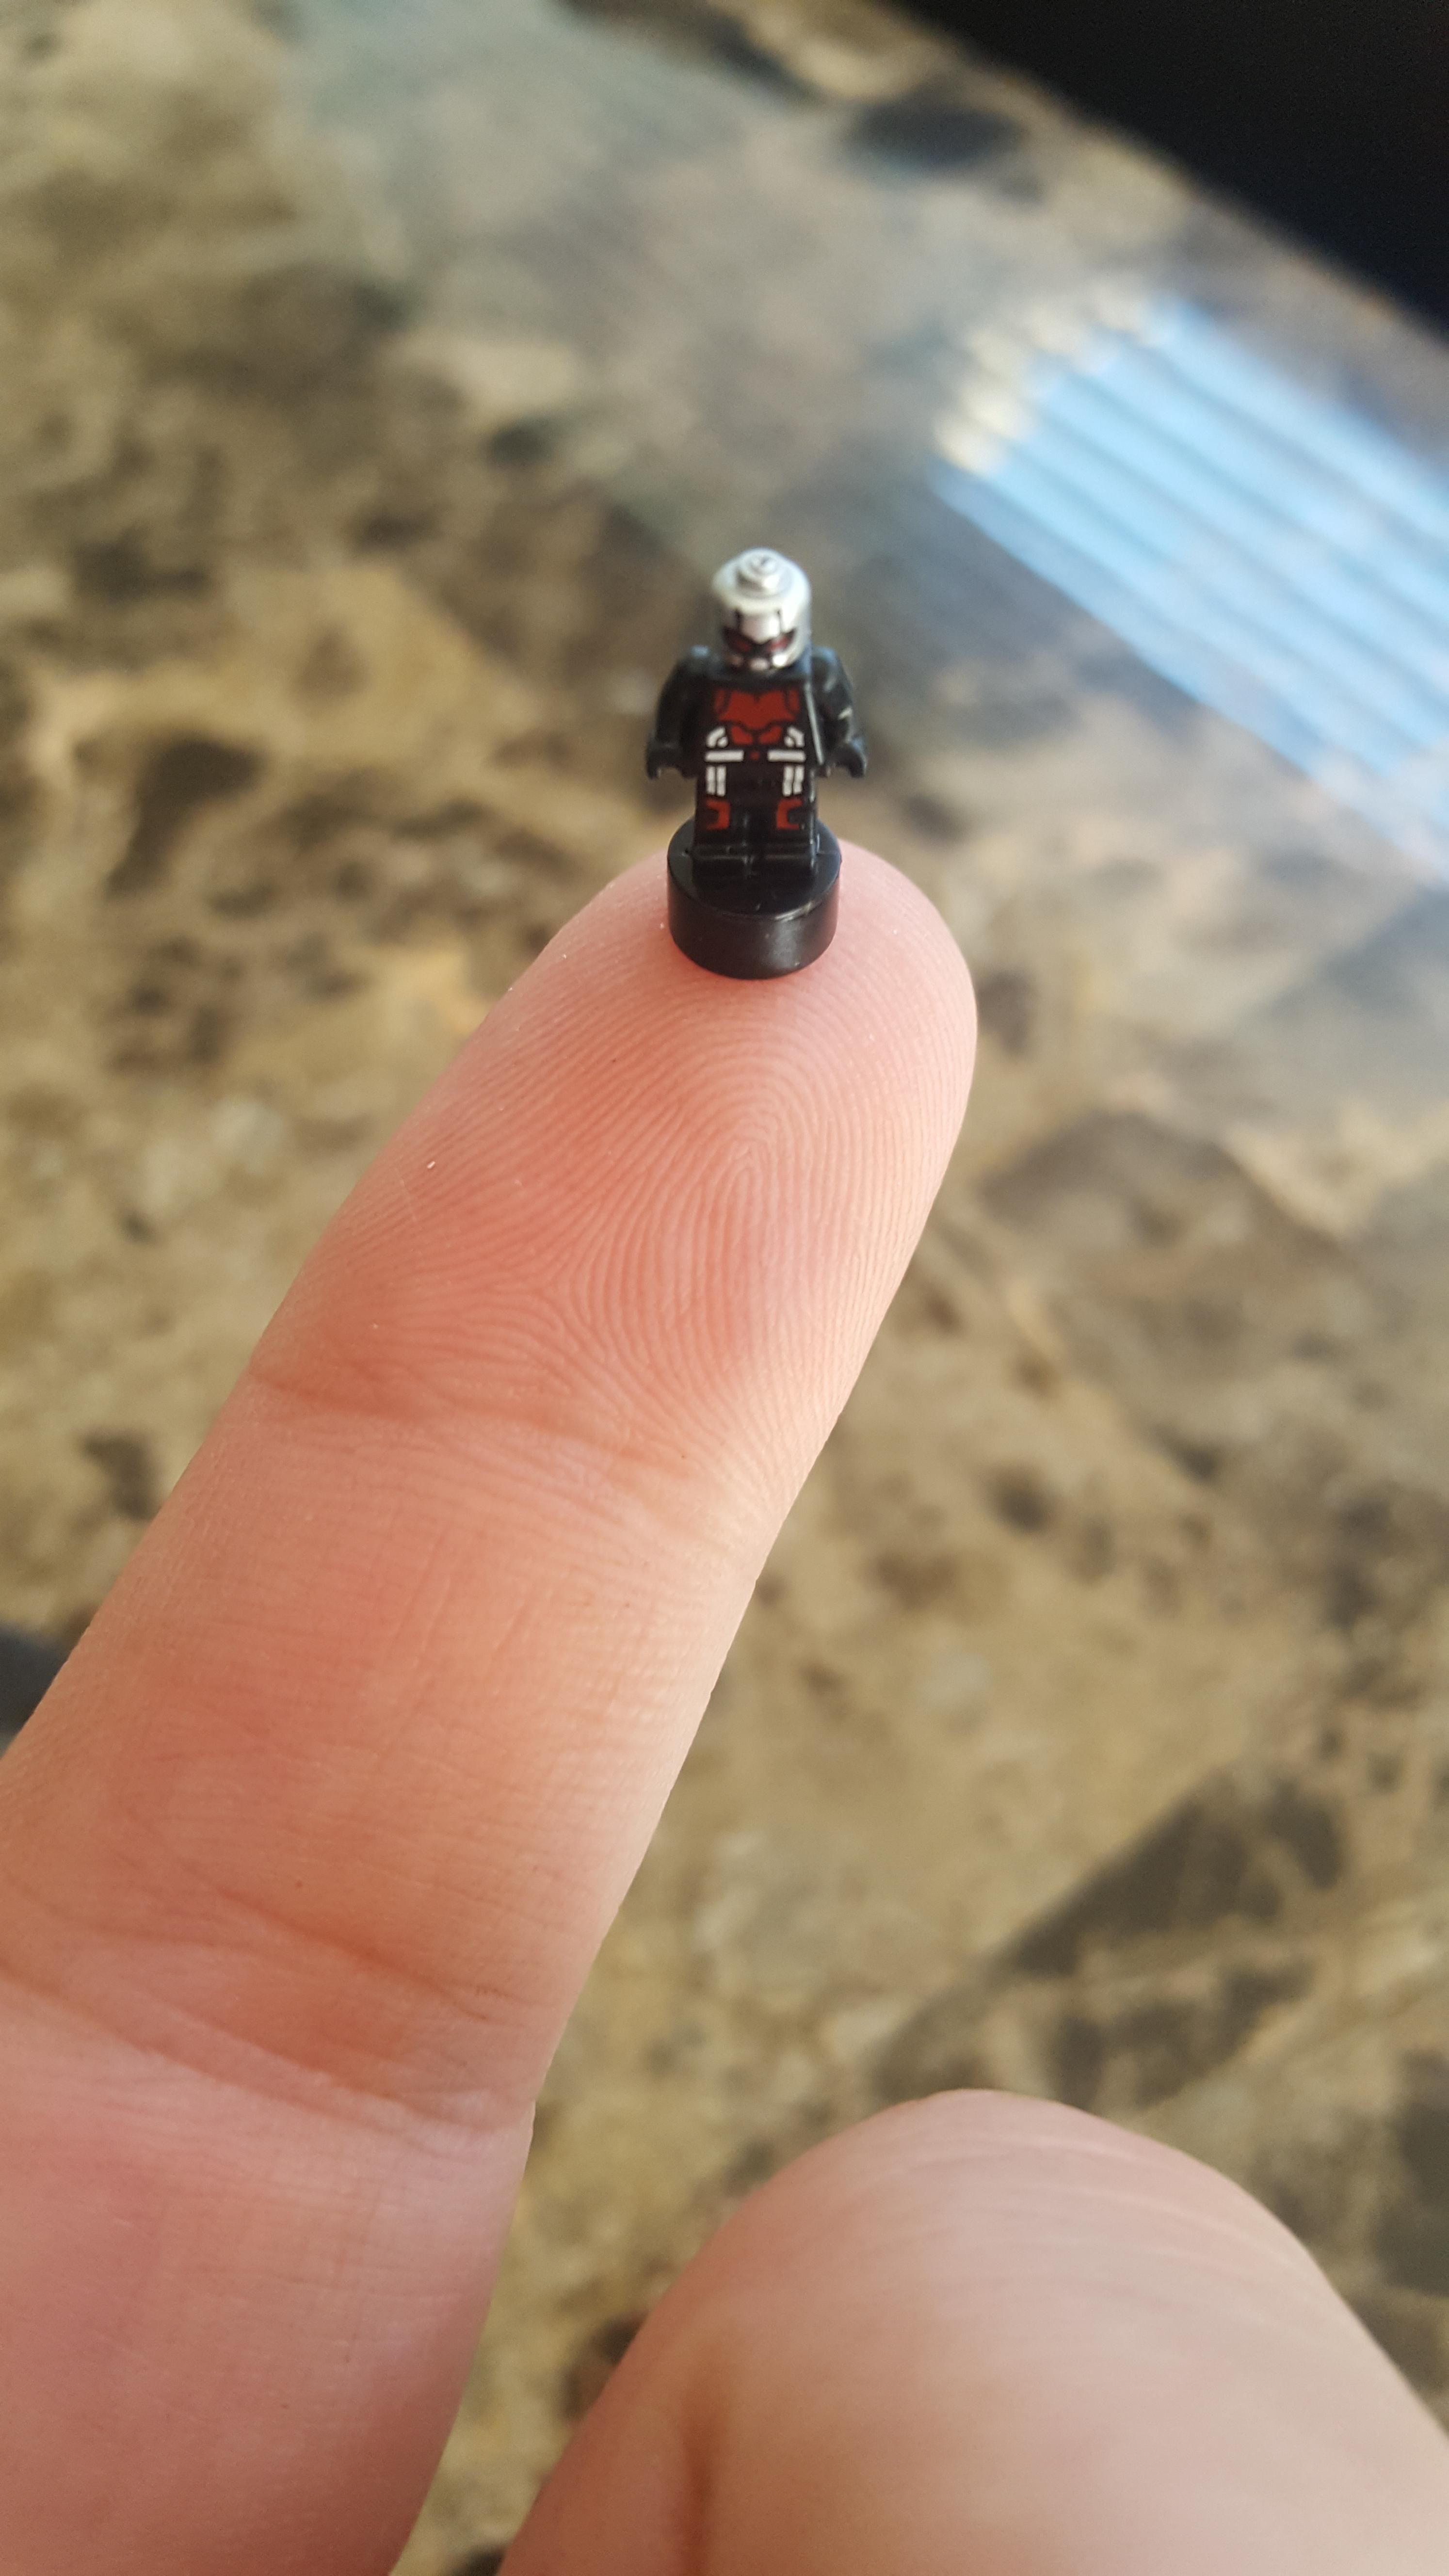 This is how tiny the Ant Man lego is.